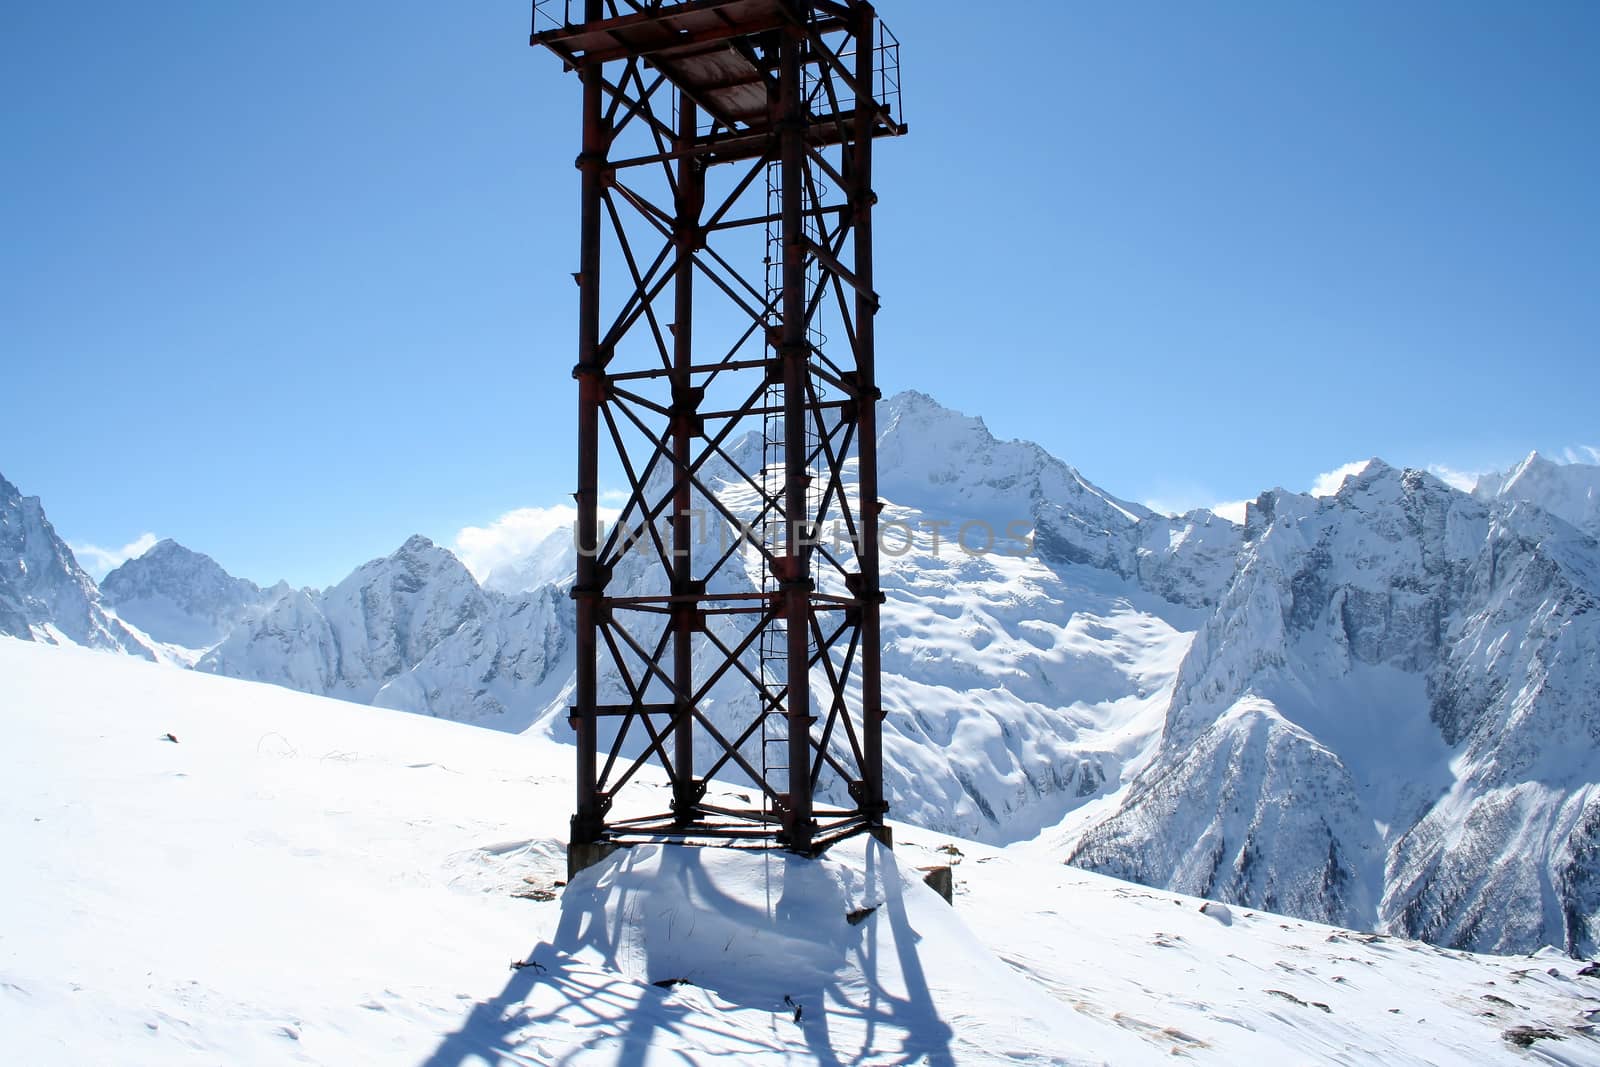 Measuring tower in the mountains of Caucasus by Vadimdem